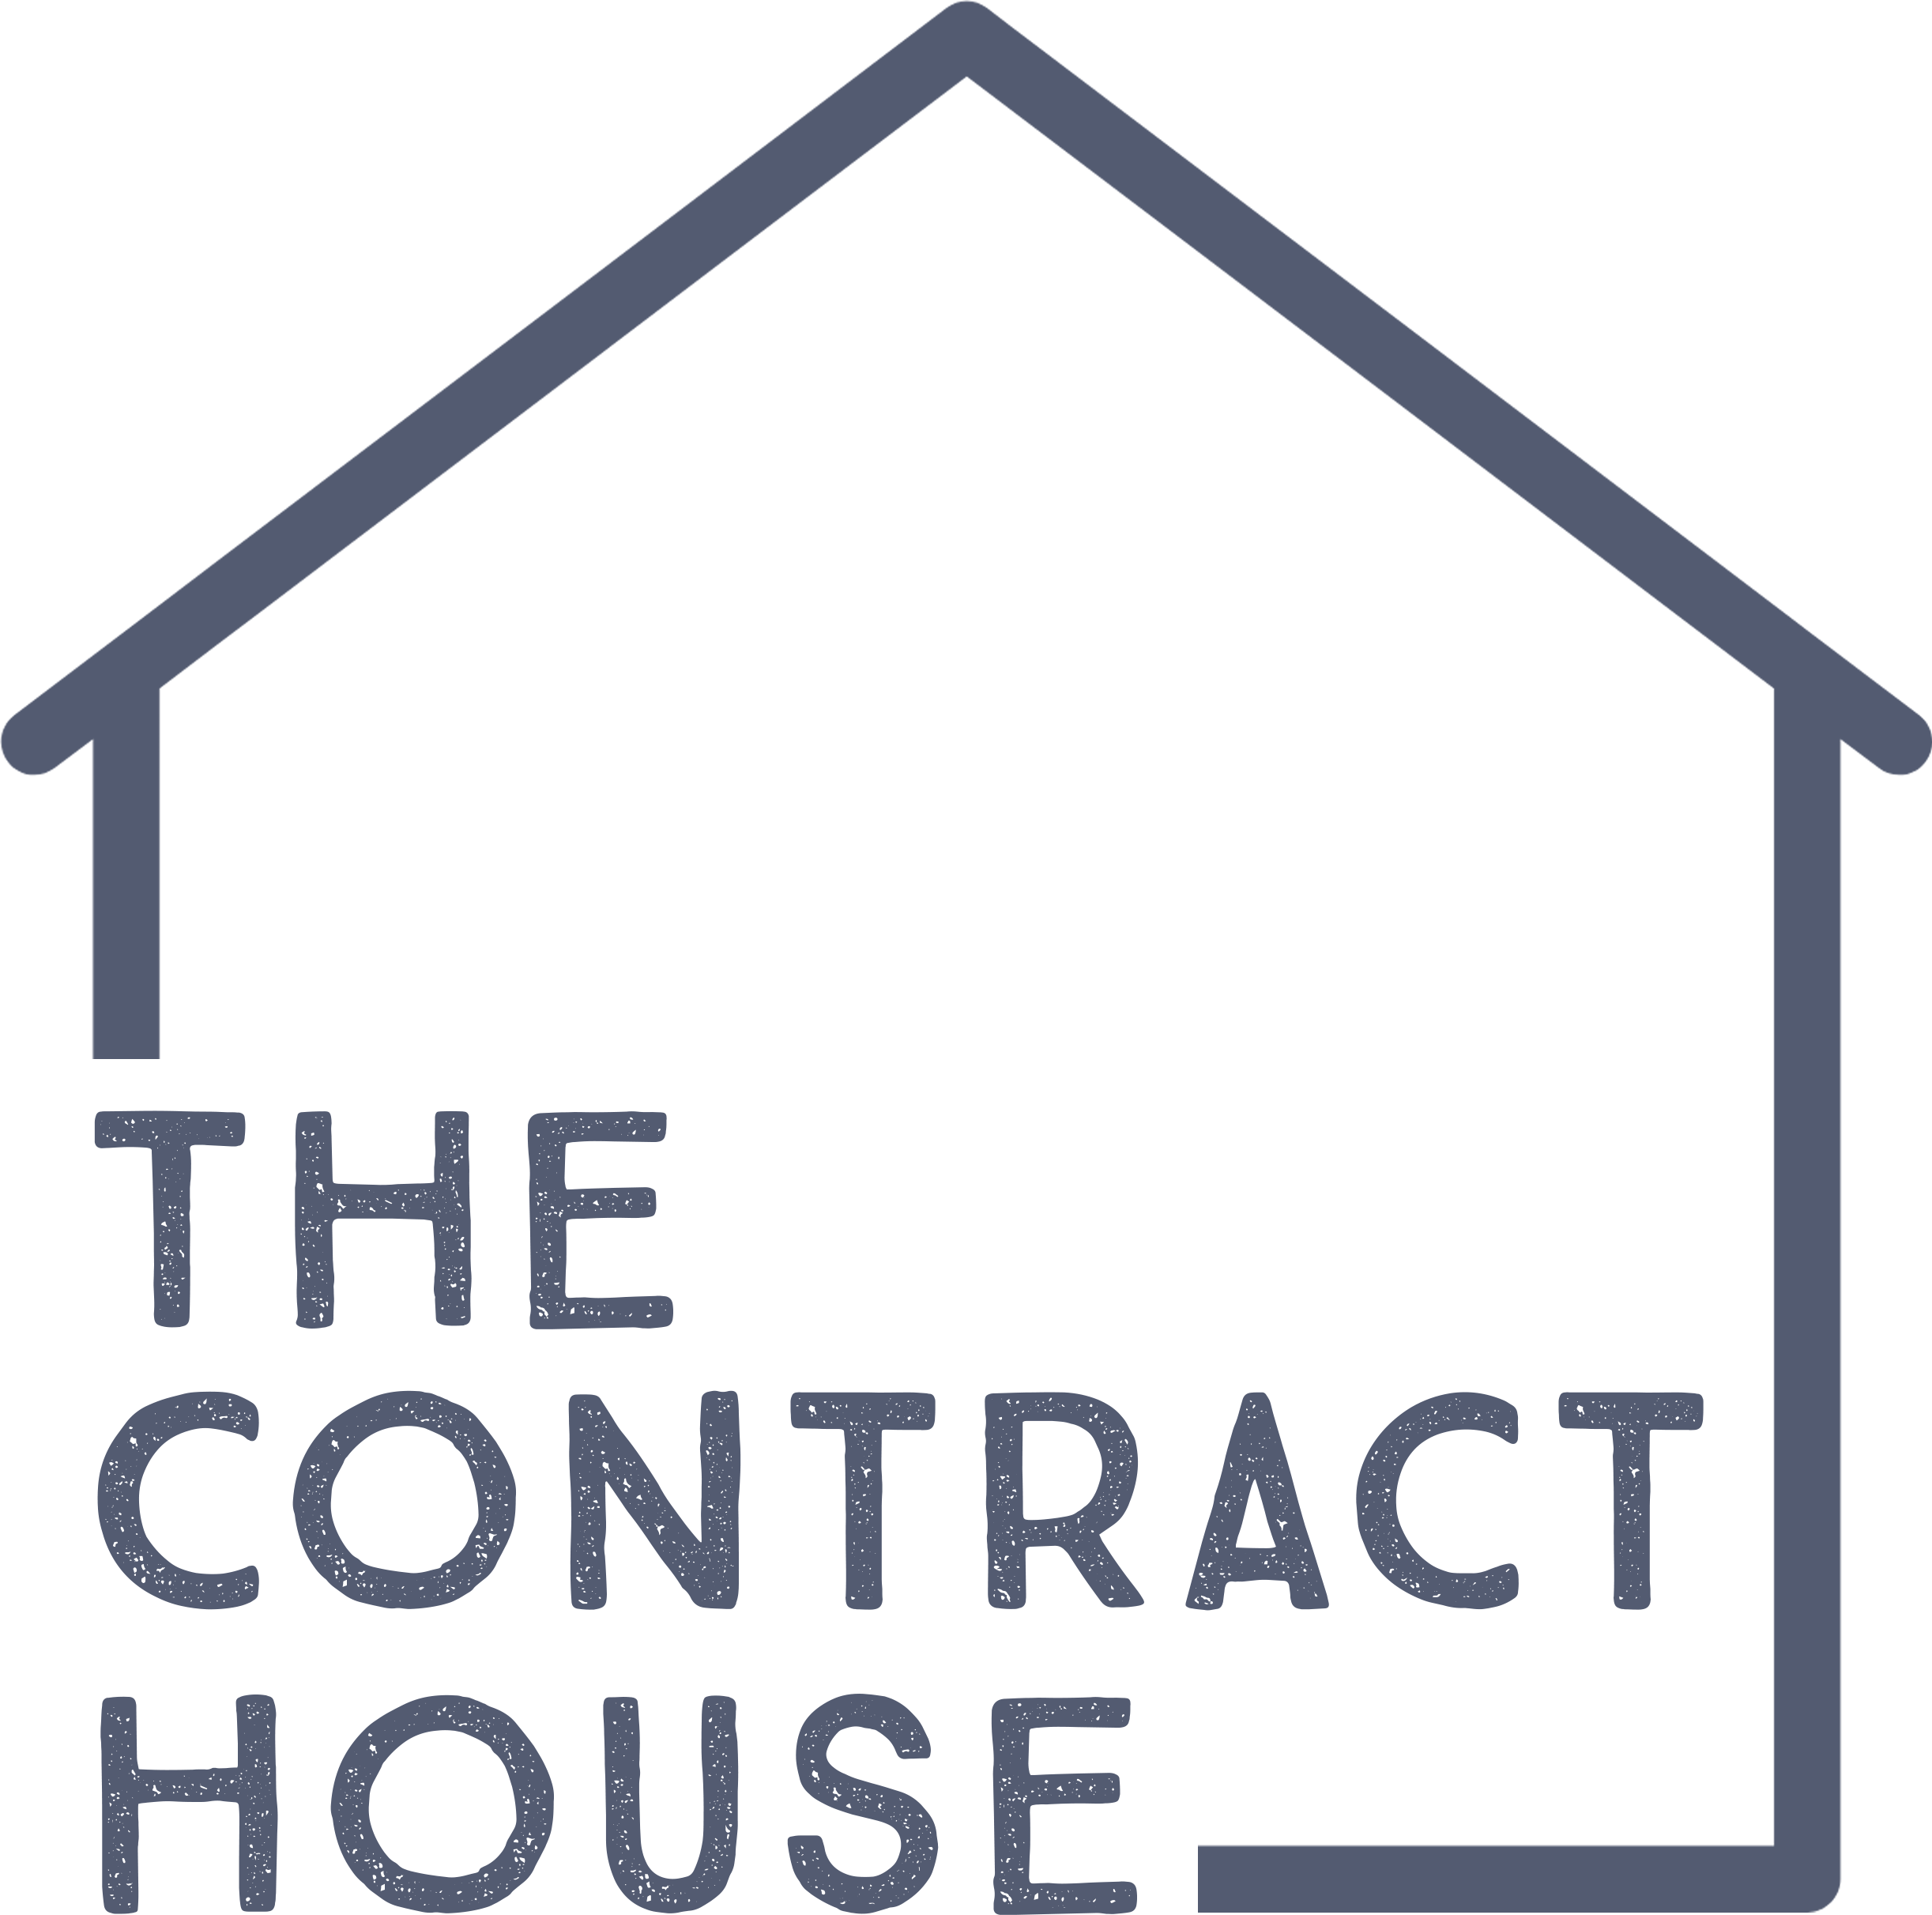 The Contract House